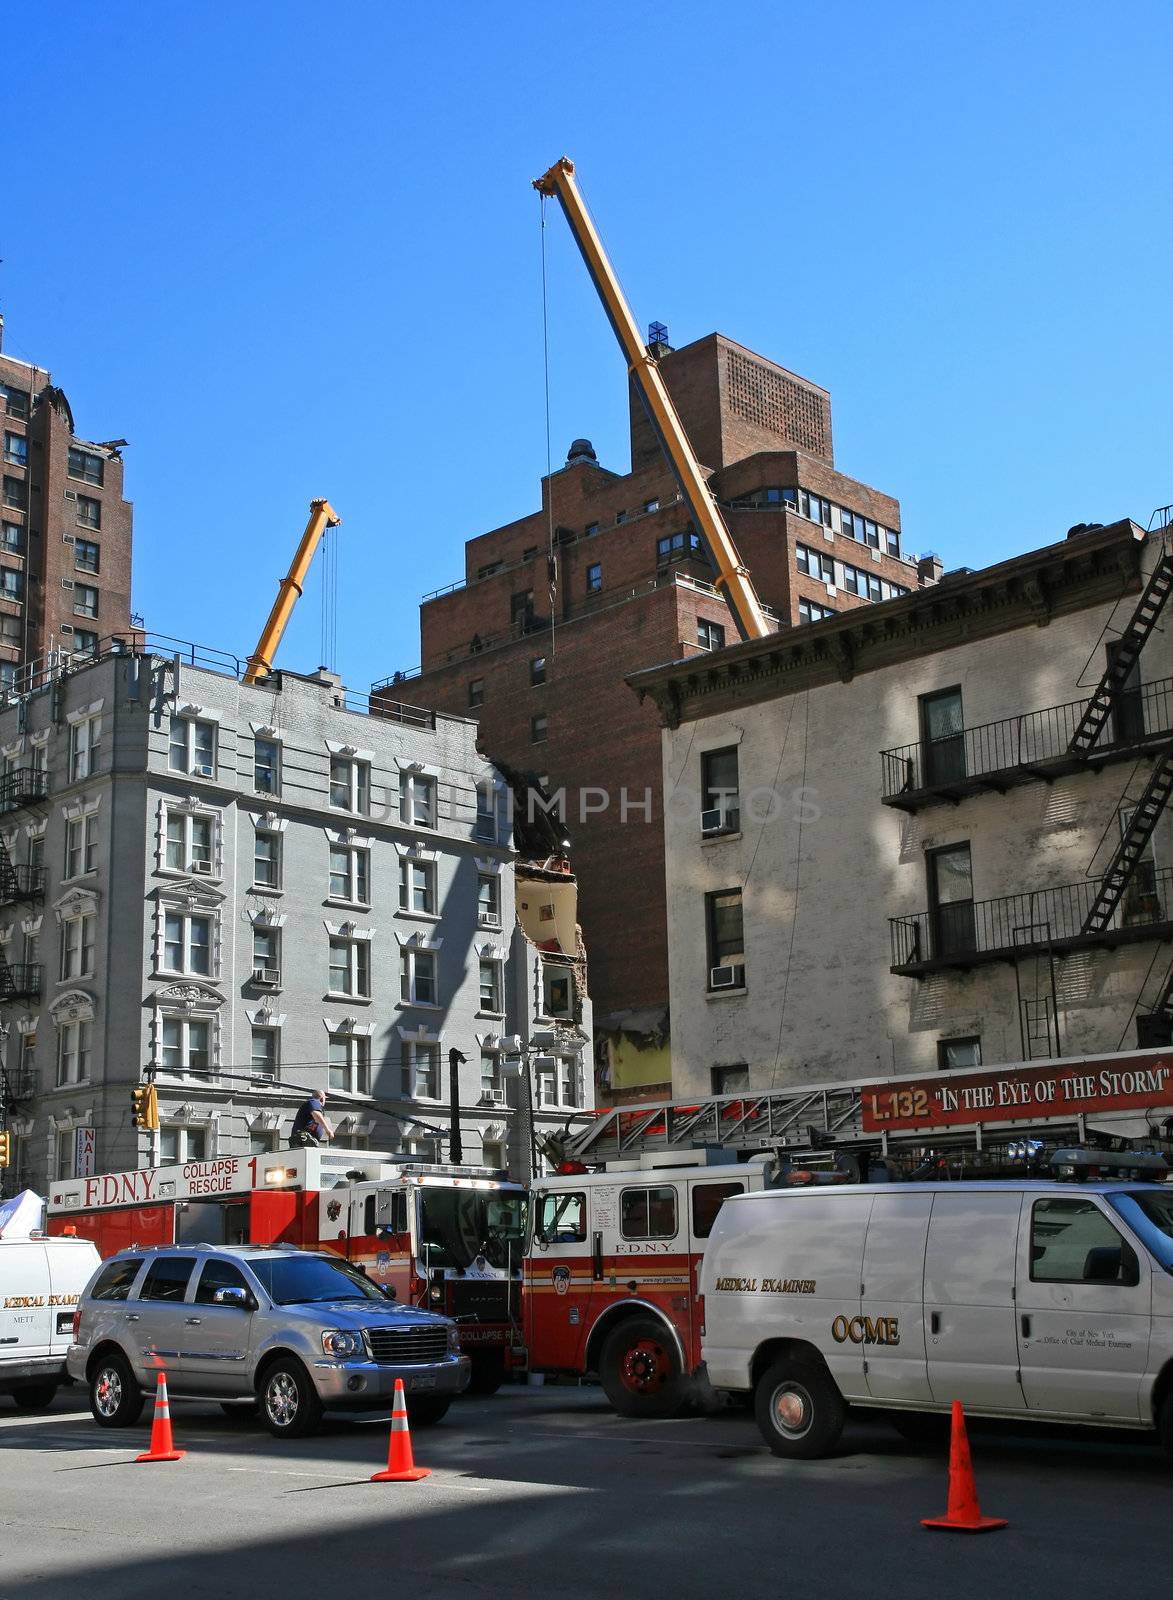 Crane collapse flatten a 4 story building and killed 7 people in Midtown Manhattan  